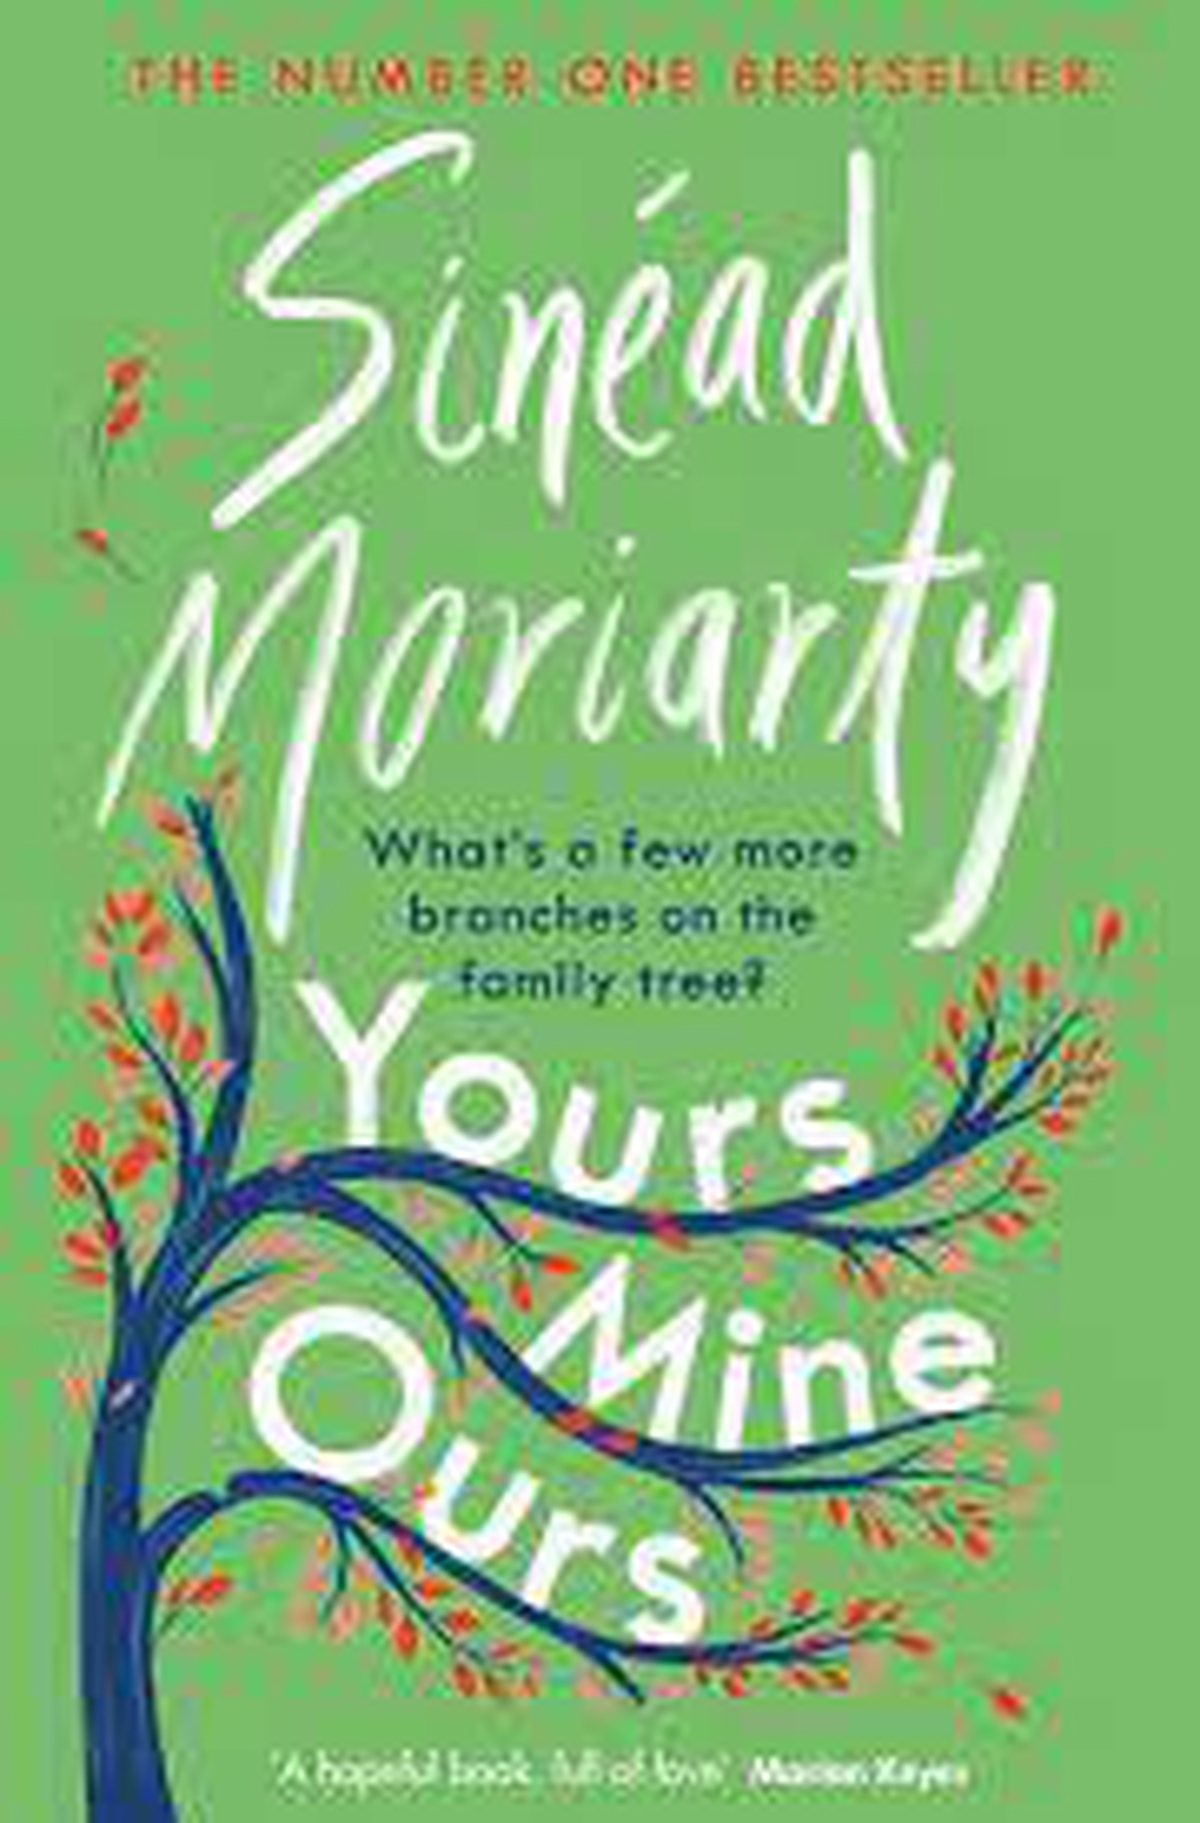 Book: Yours, Mine, Ours by Sinéad Moriarty